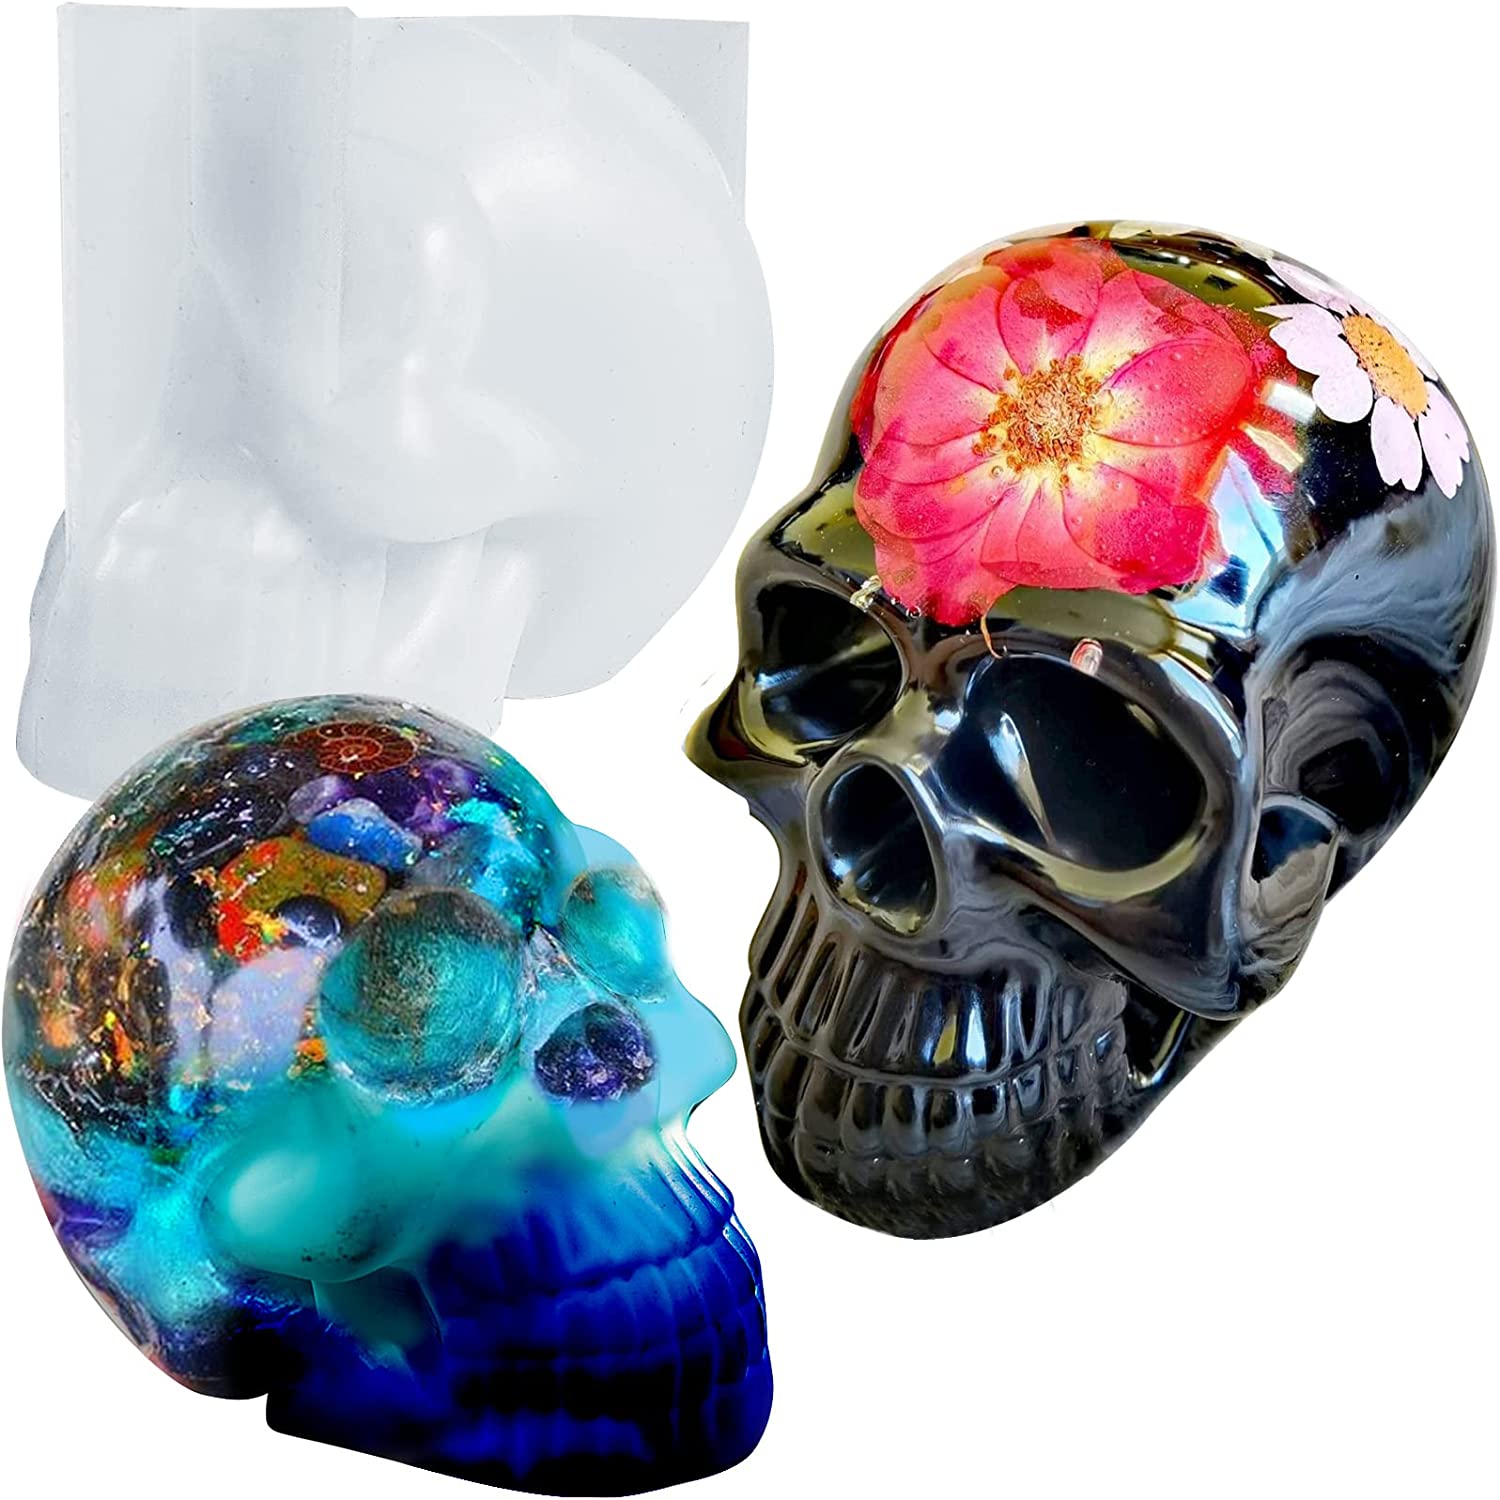 Resin Mold, Silicone Ashtray Mold Halloween Skull DIY Craft Gift Epoxy  Resin Casting Molds Jewelry Storage Mould For Party, Home Decoration